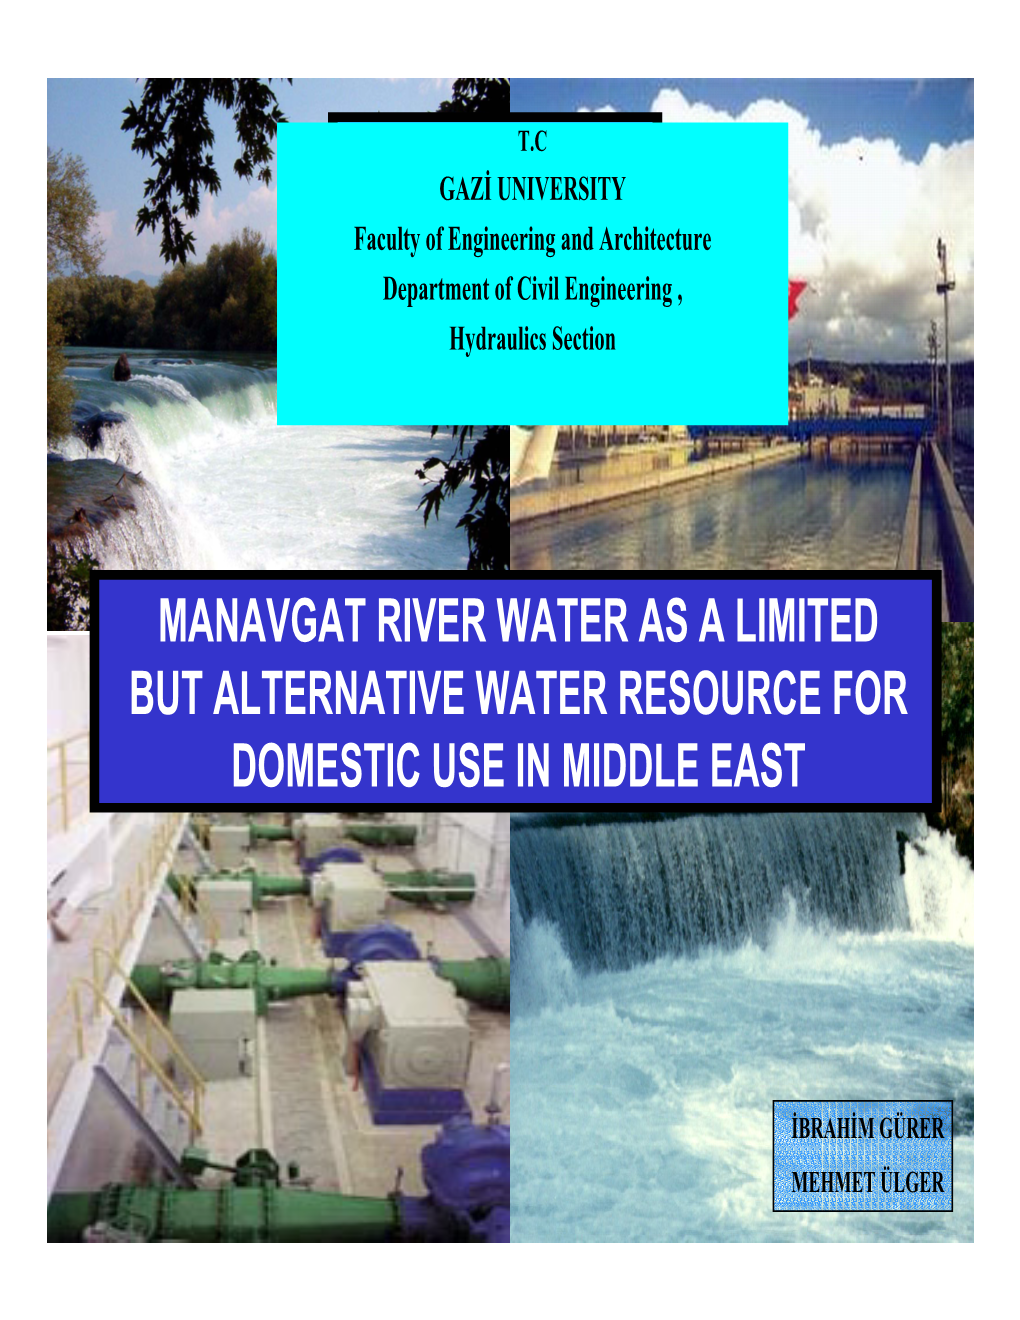 Manavgat River Water As a Limited but Alternative Water Resource for Domestic Use in Middle East